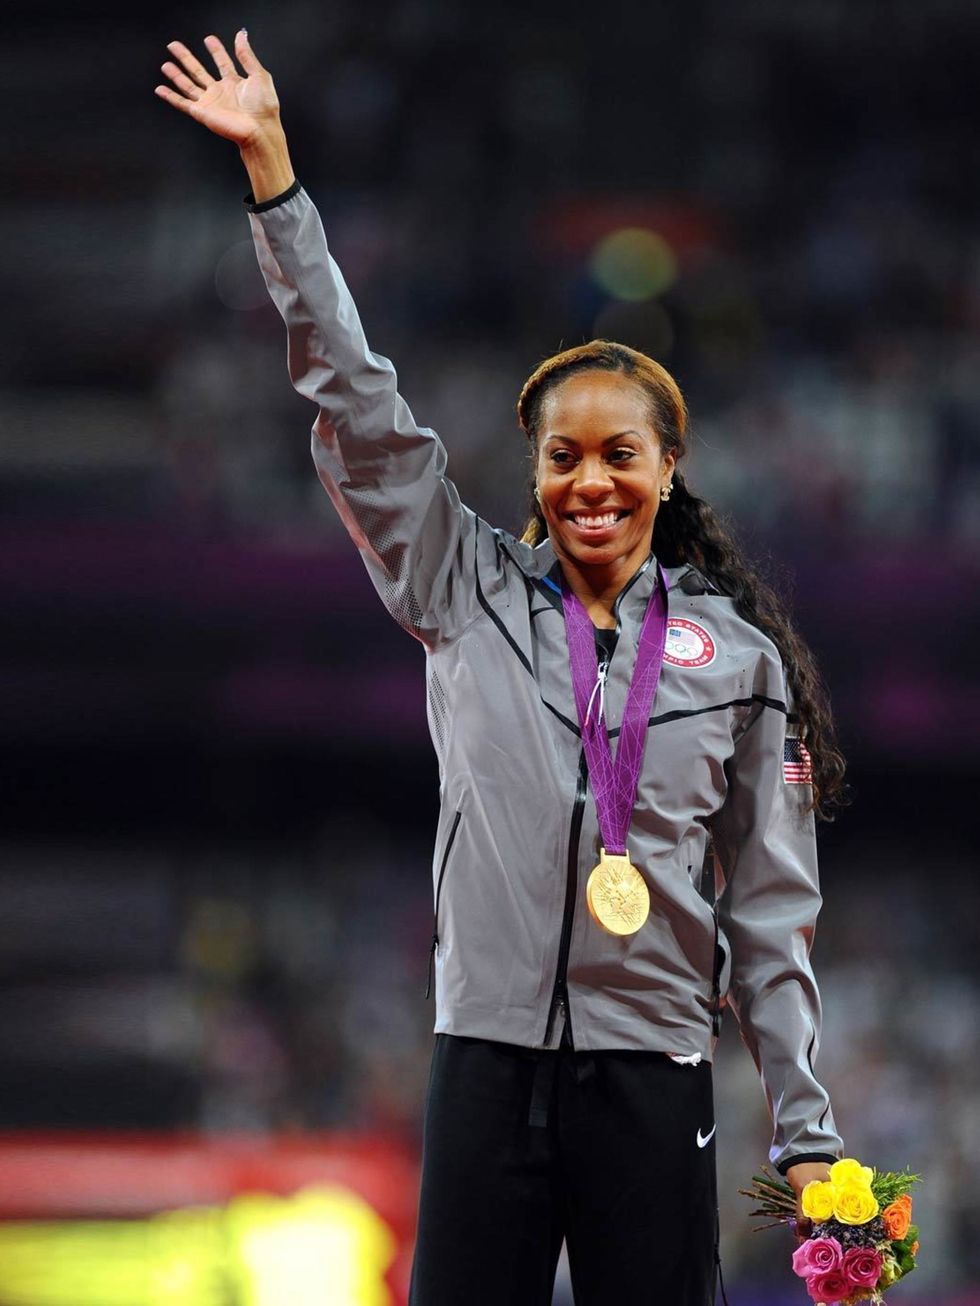 <p>Sanya Richards-Ross wins a gold medal for the Women's 400m during the London Olympics, August 2012.</p>